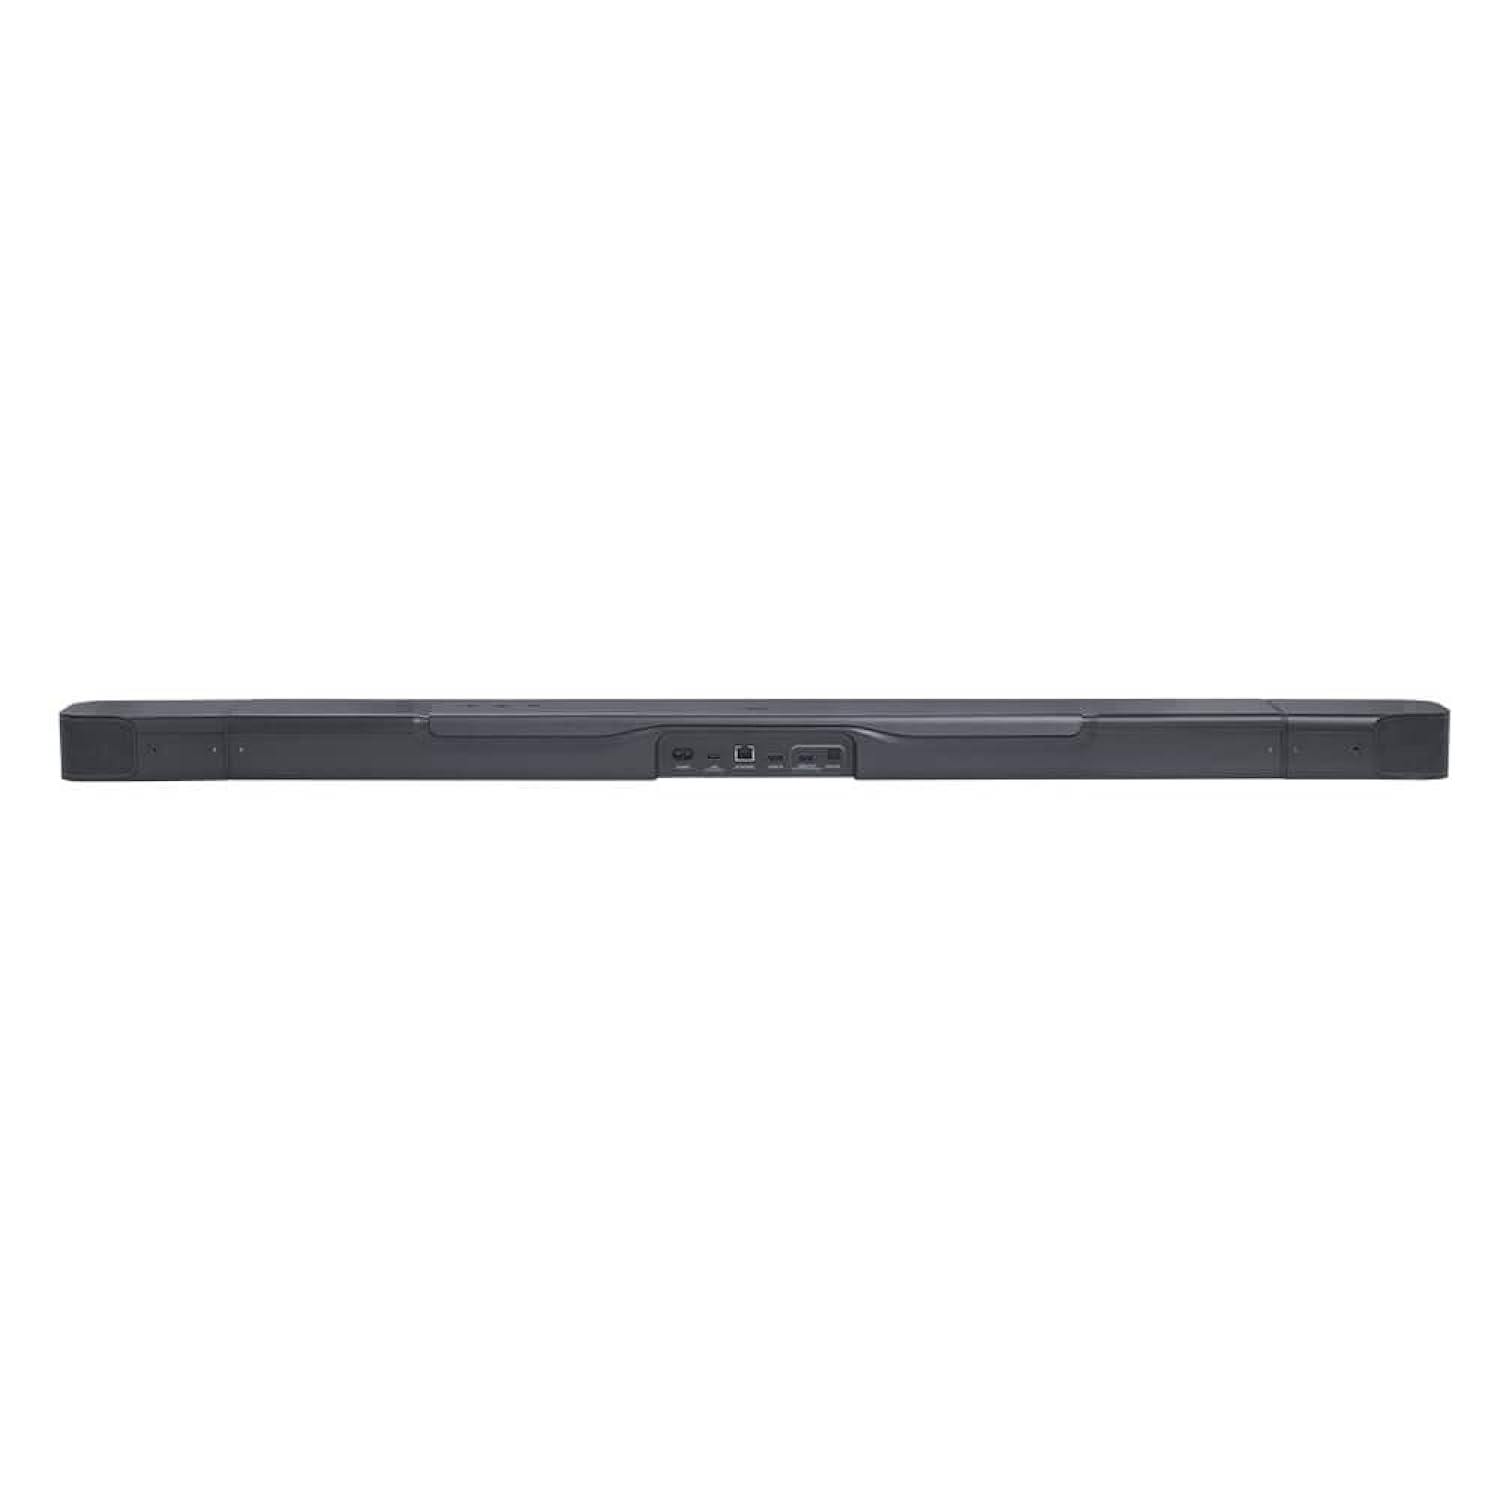 JBL Bar 700: 5.1-Channel soundbar with Detachable Surround Speakers and Dolby Atmos